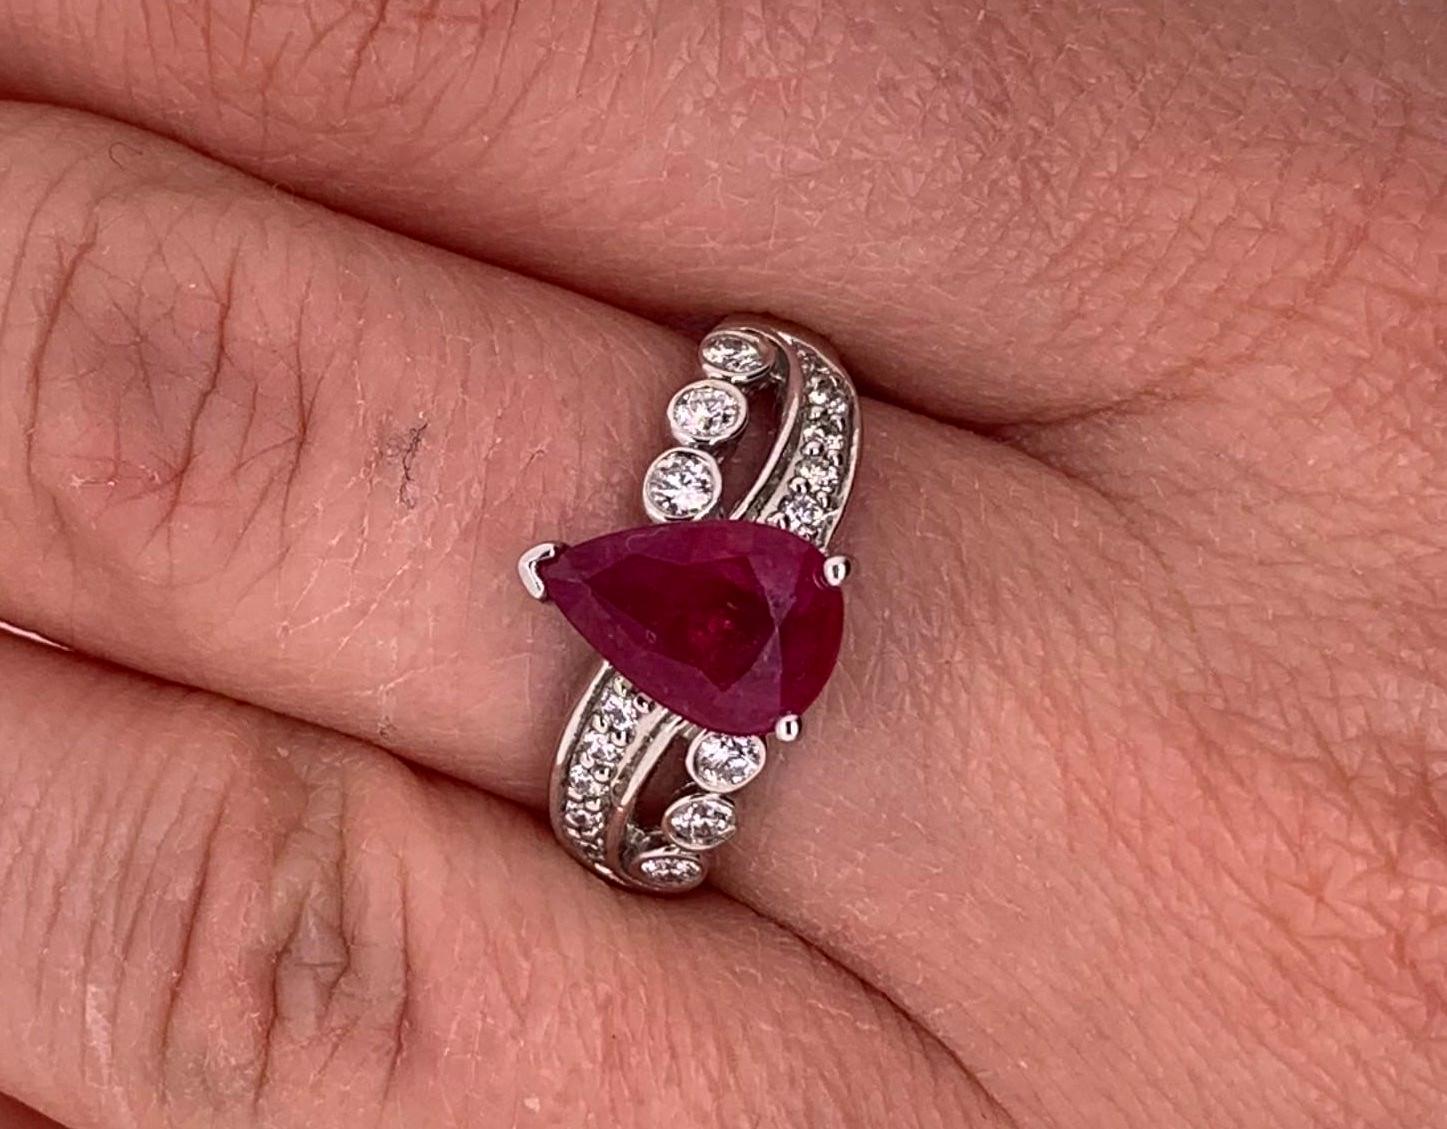 Material: 14k White Gold
Gemstone Details: 1 Pear Shaped Ruby at 1.97 Carats - Measuring 9.5 x 6.5 mm
Diamond Details: 16 Brilliant Round White Diamonds at 0.28 Carats. SI Clarity / H-I Color. 
Ring Size: 6.5. Alberto offers complimentary sizing on